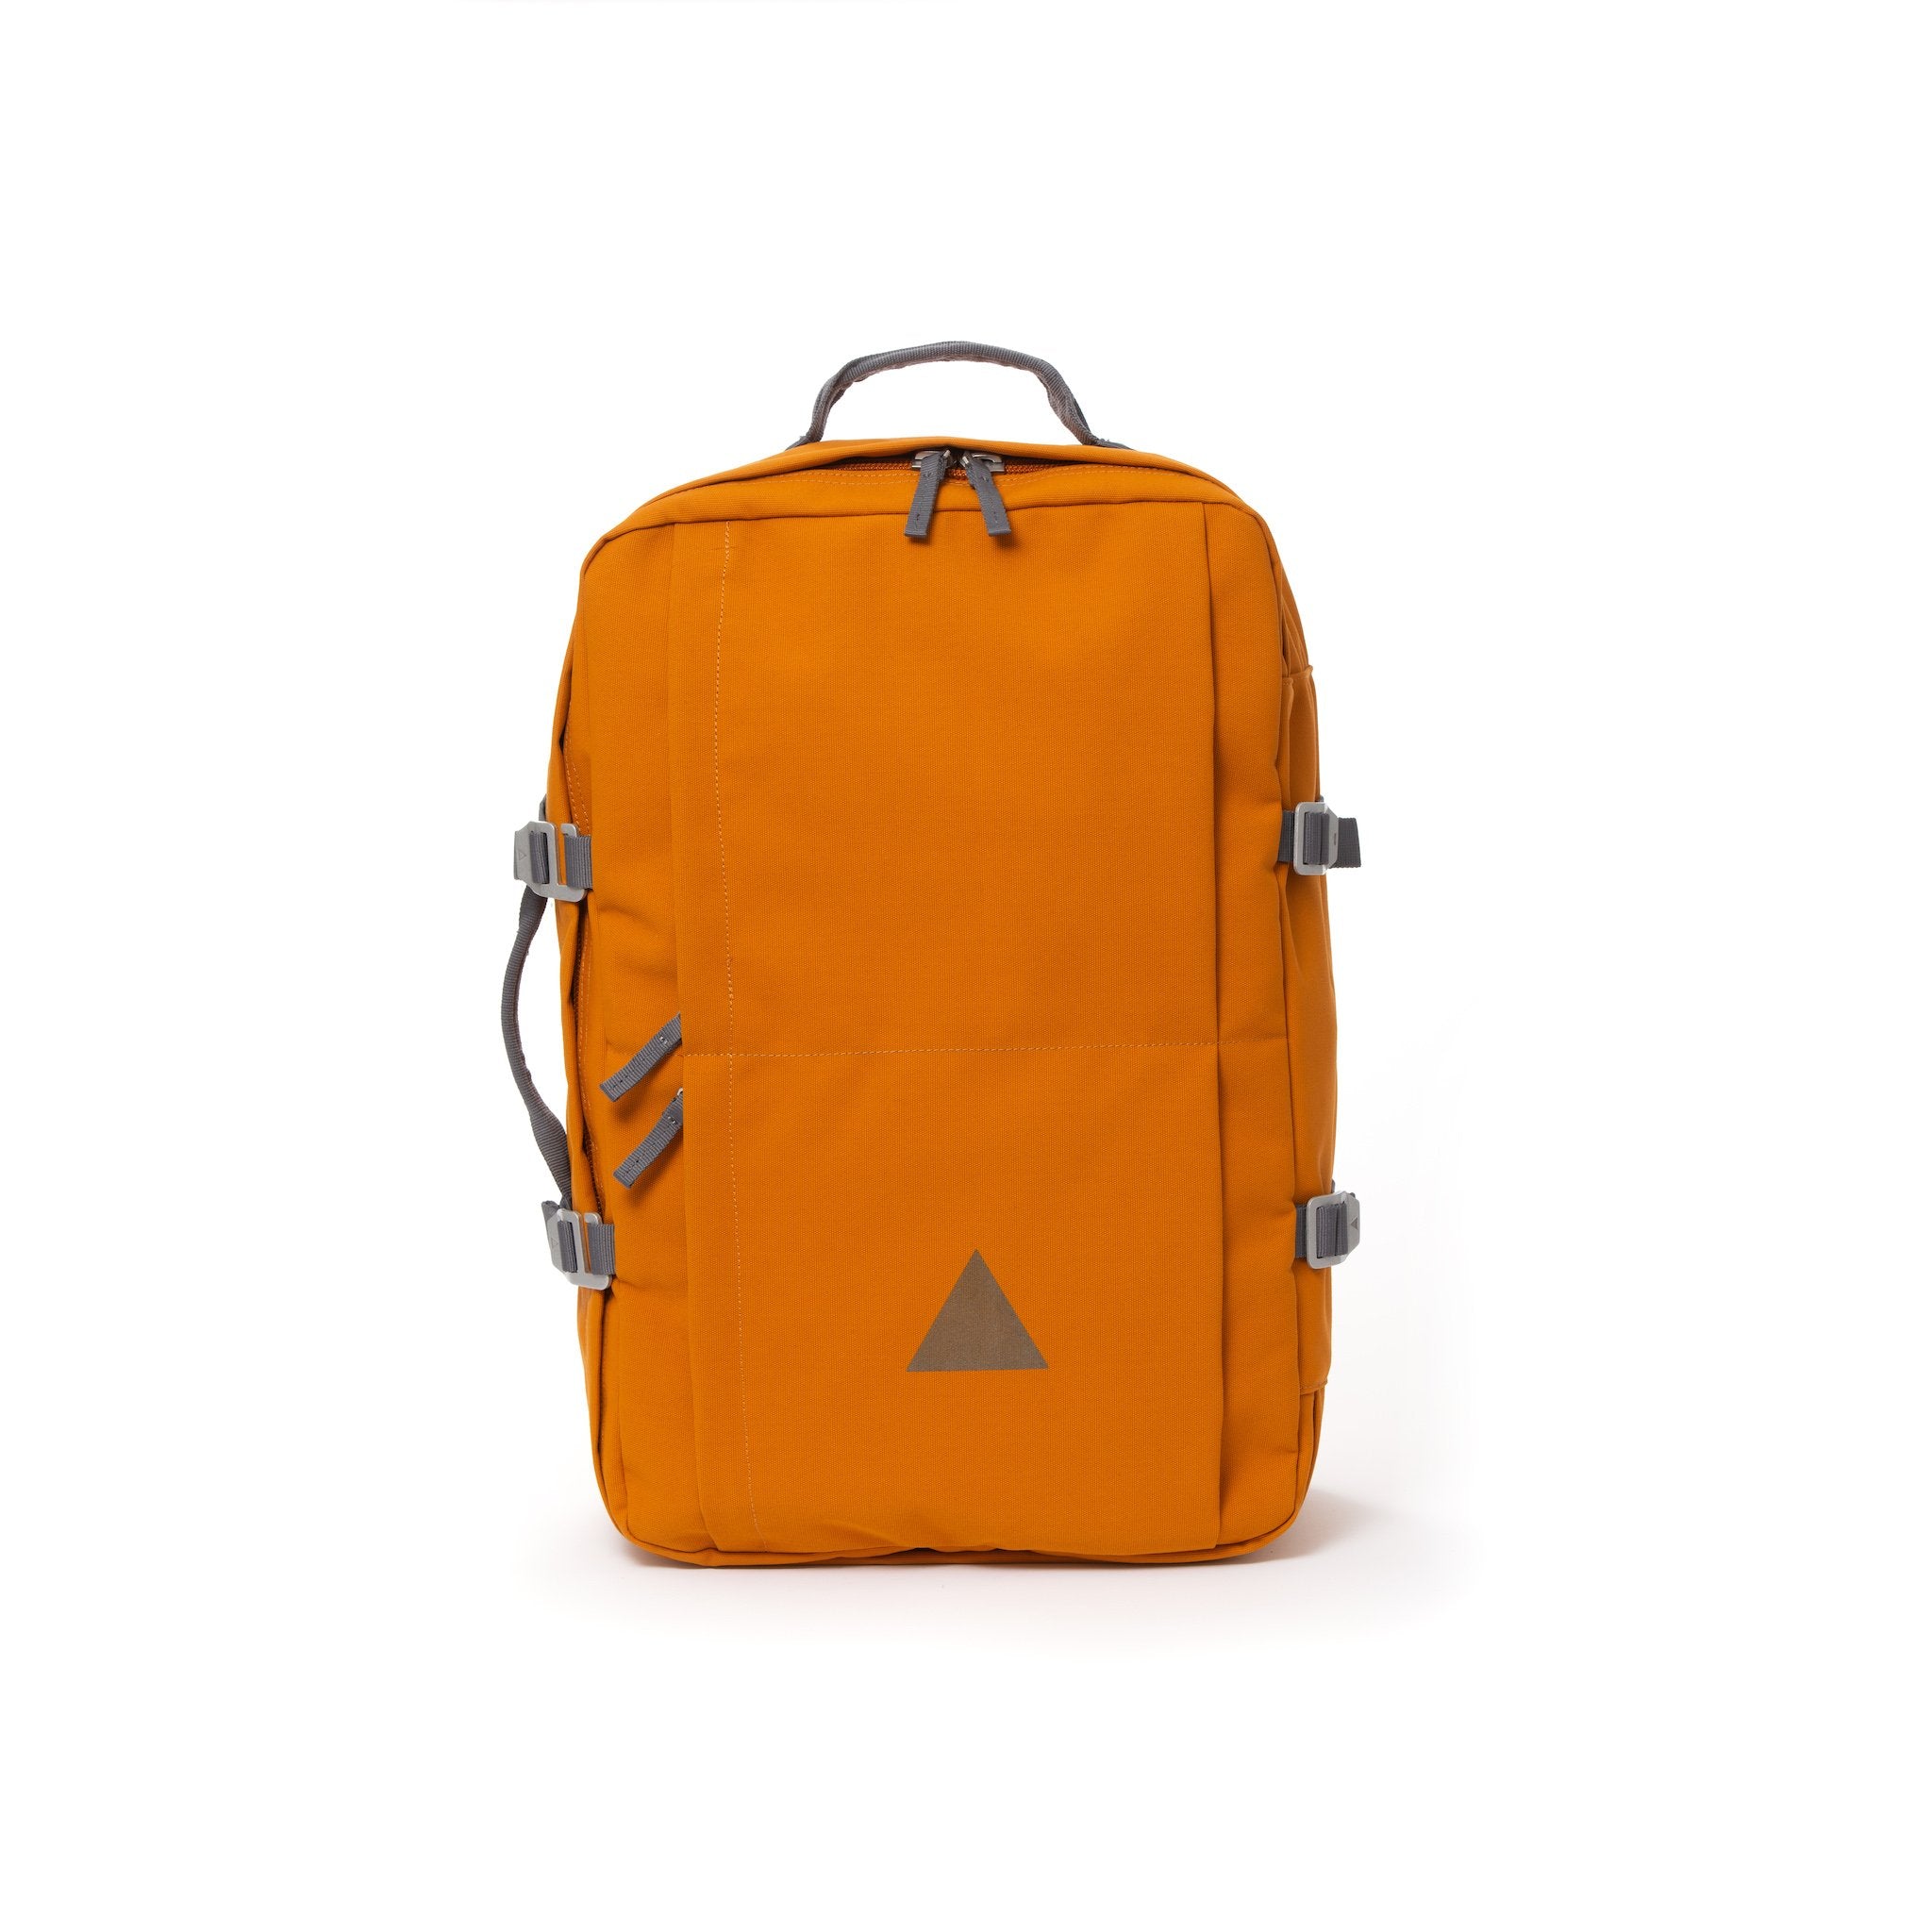 Orange recycled canvas travel backpack.